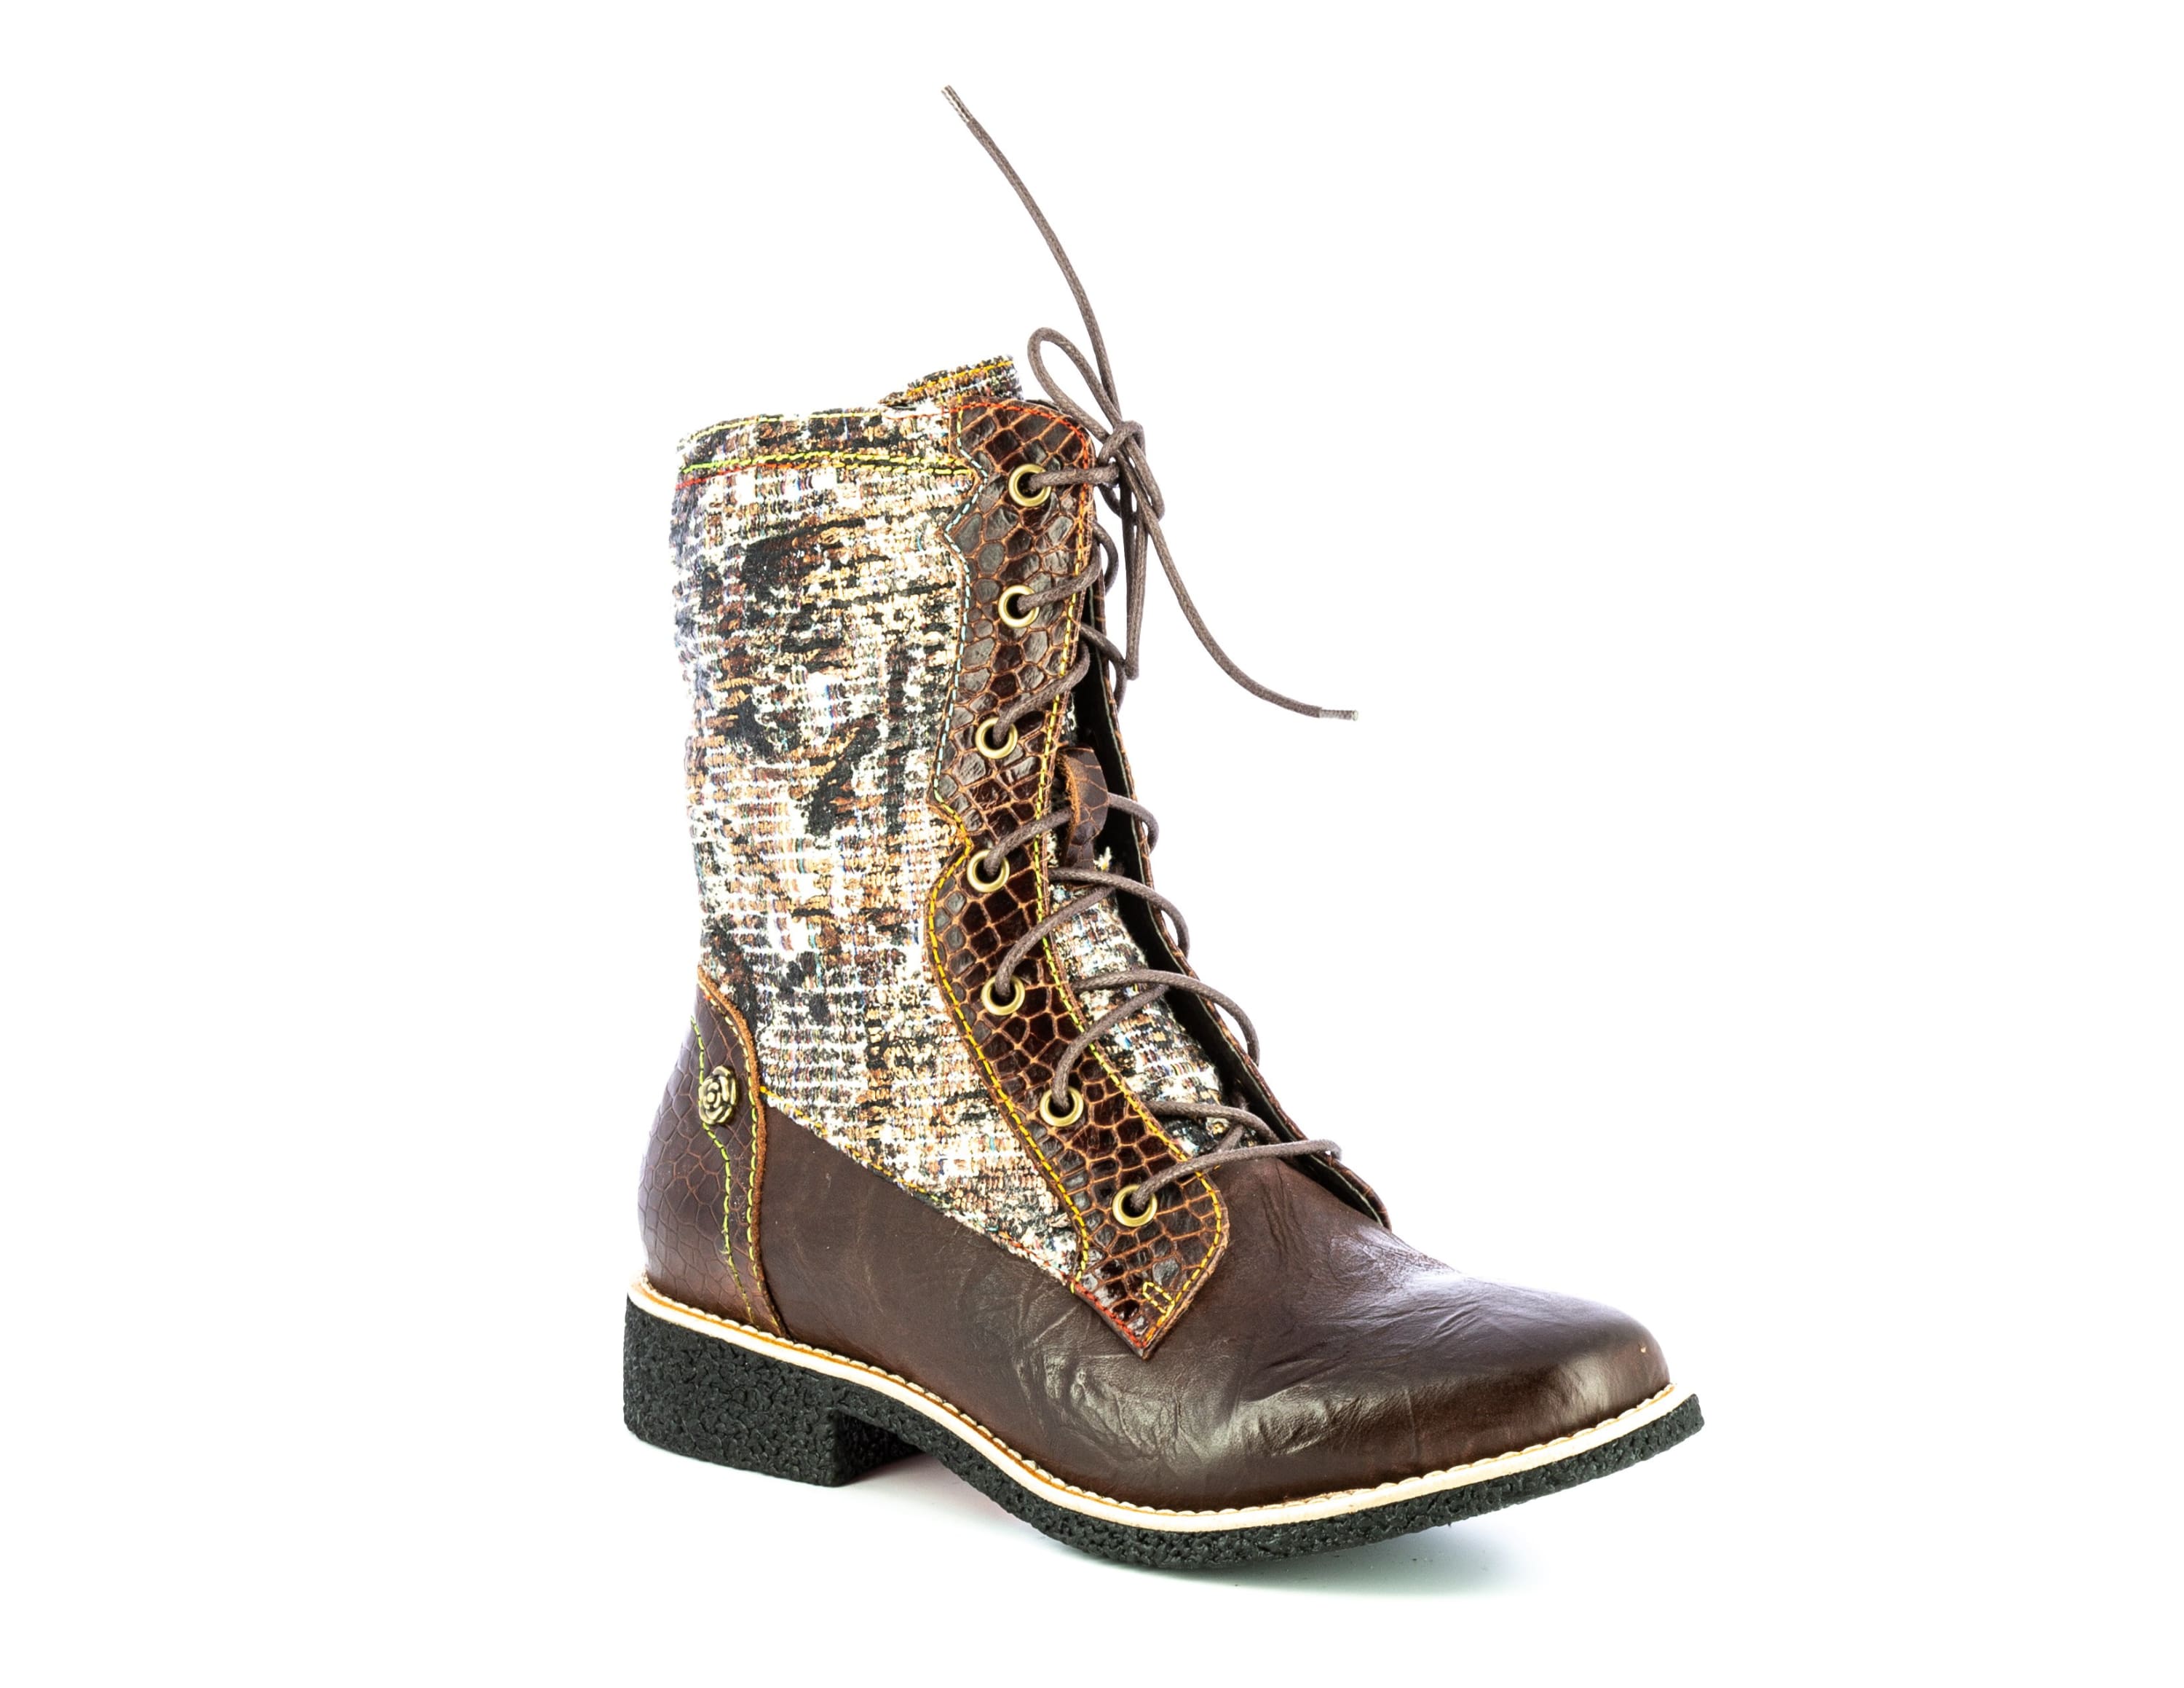 Schuh COCRALIEO 521 - Boots